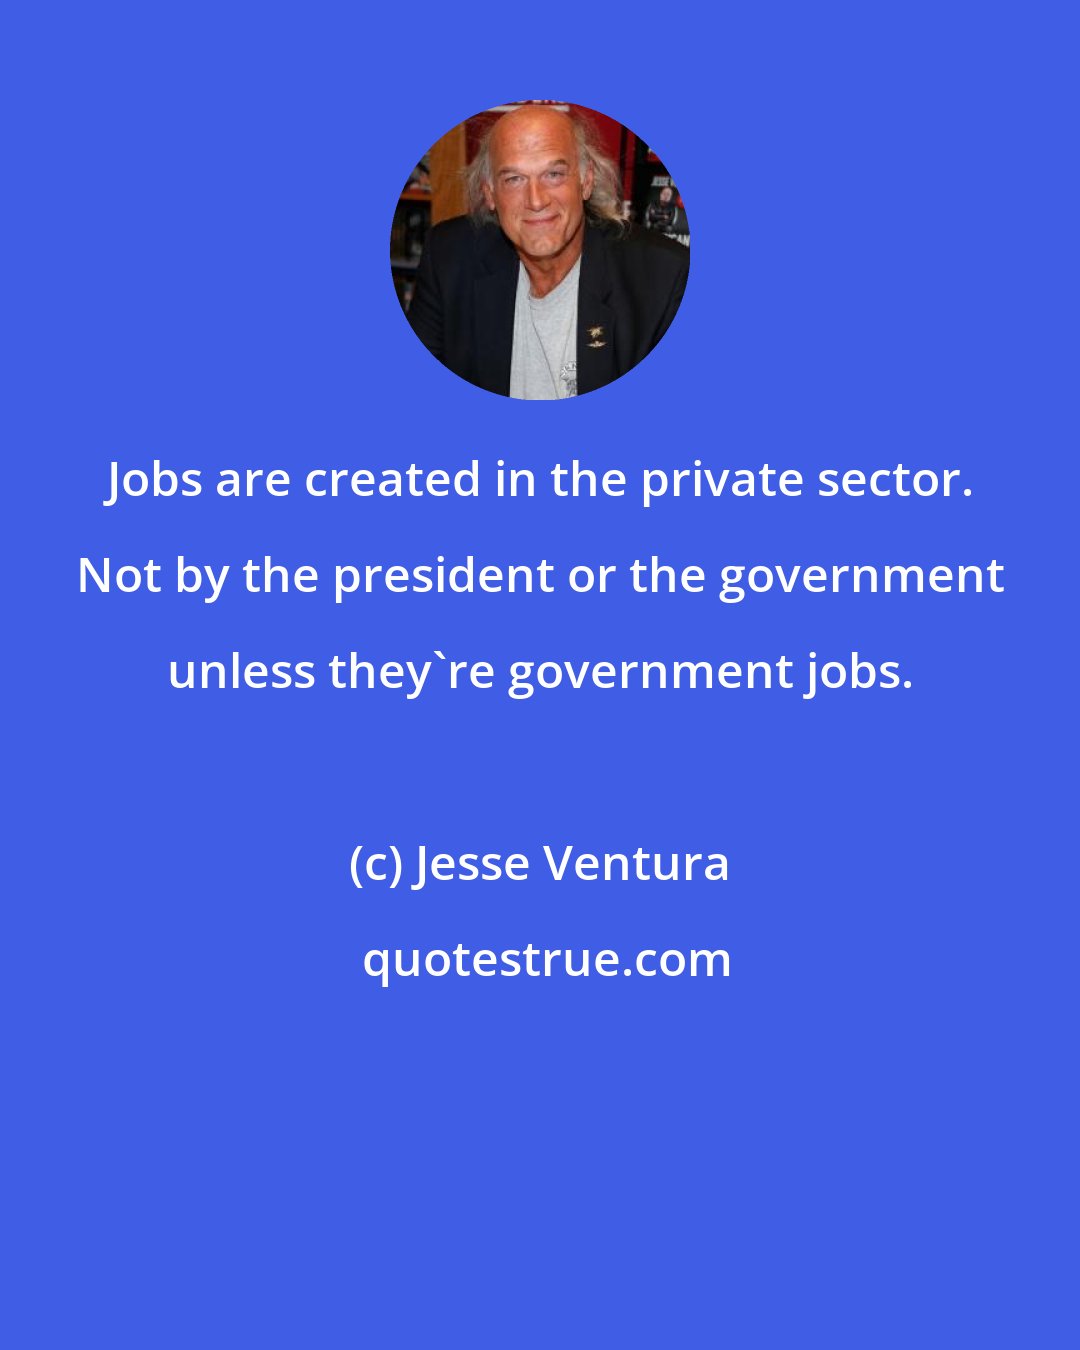 Jesse Ventura: Jobs are created in the private sector. Not by the president or the government unless they're government jobs.